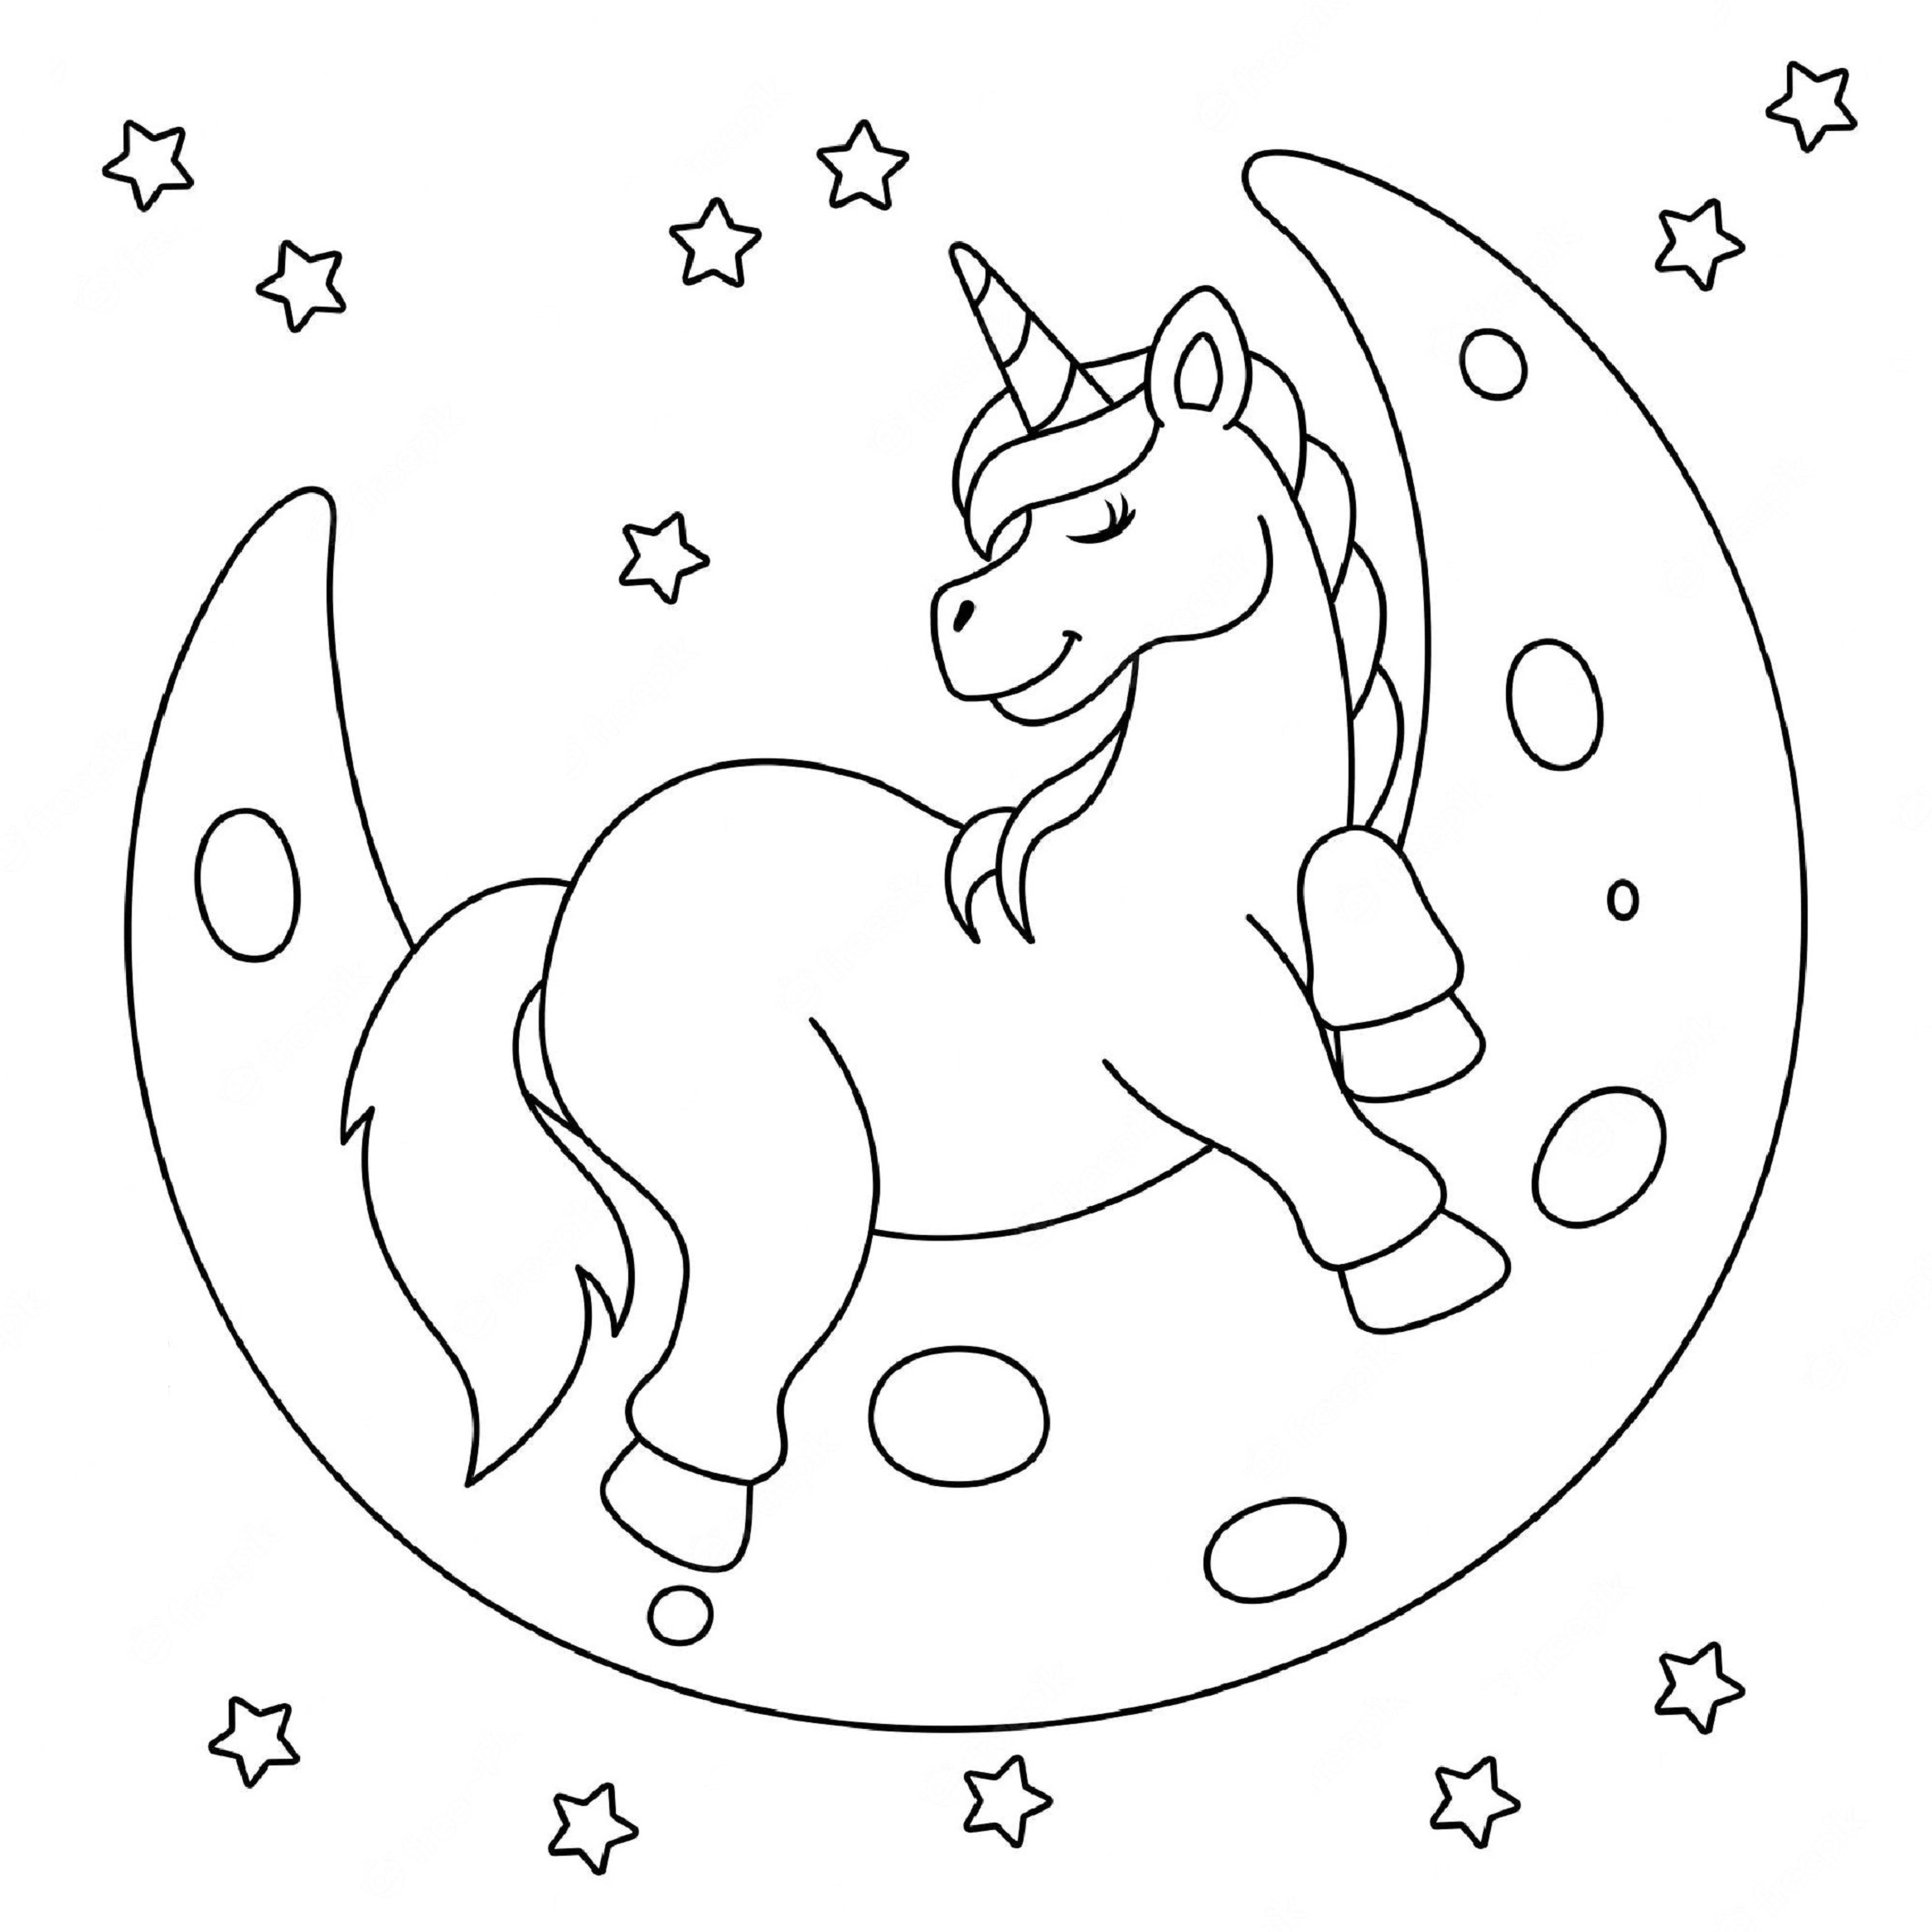 Printable Unicorn and the Moon Dreams Coloring Page for kids.